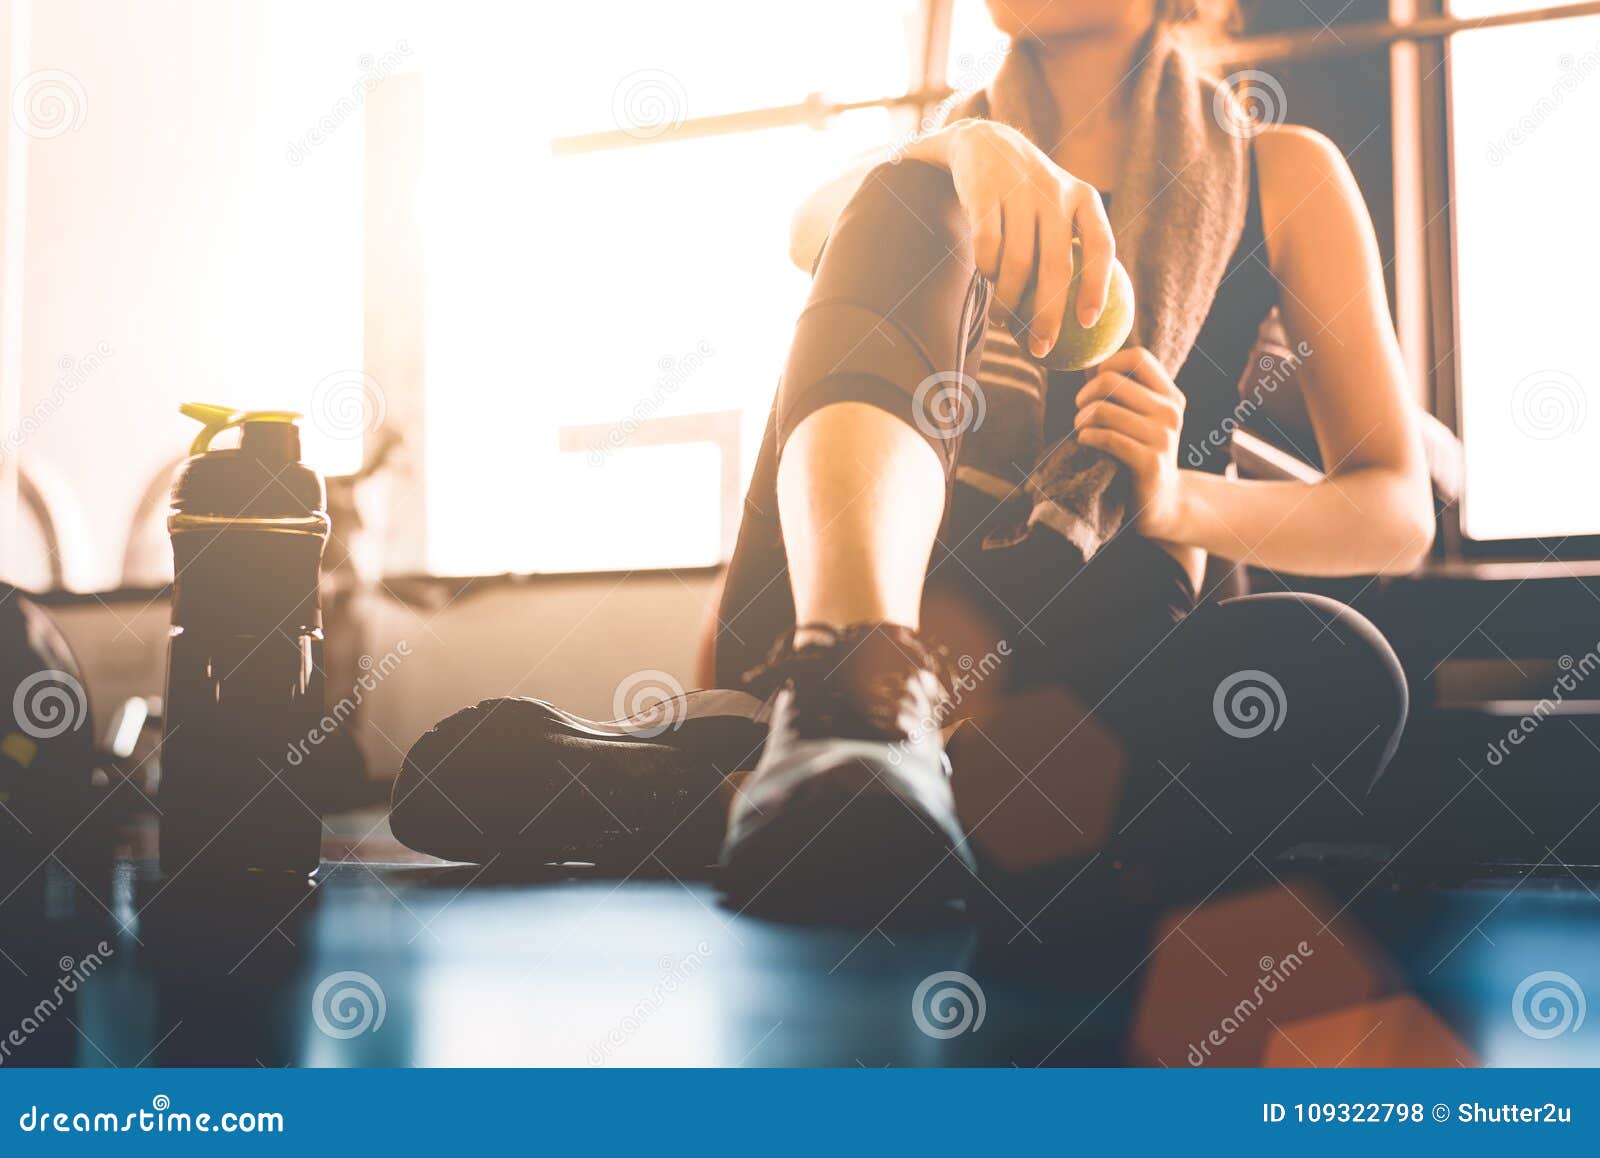 sport woman sitting and resting after workout or exercise in fit